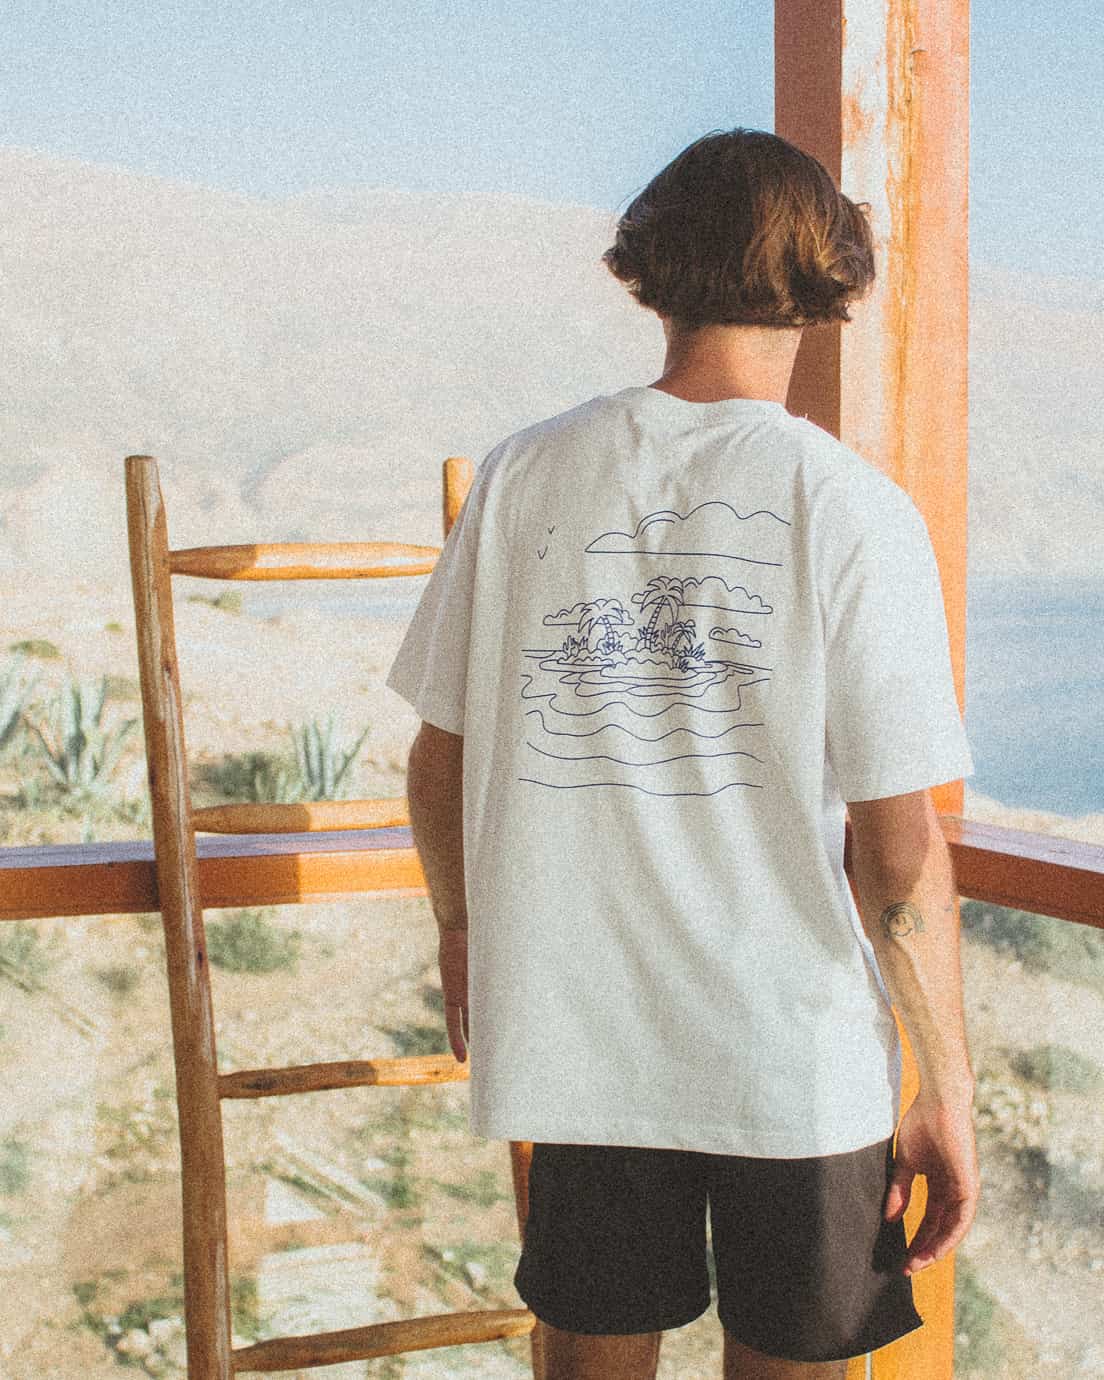 vetements surf salty smile VACATION OFF WHITE T SHIRT marque eco responsable coton bio